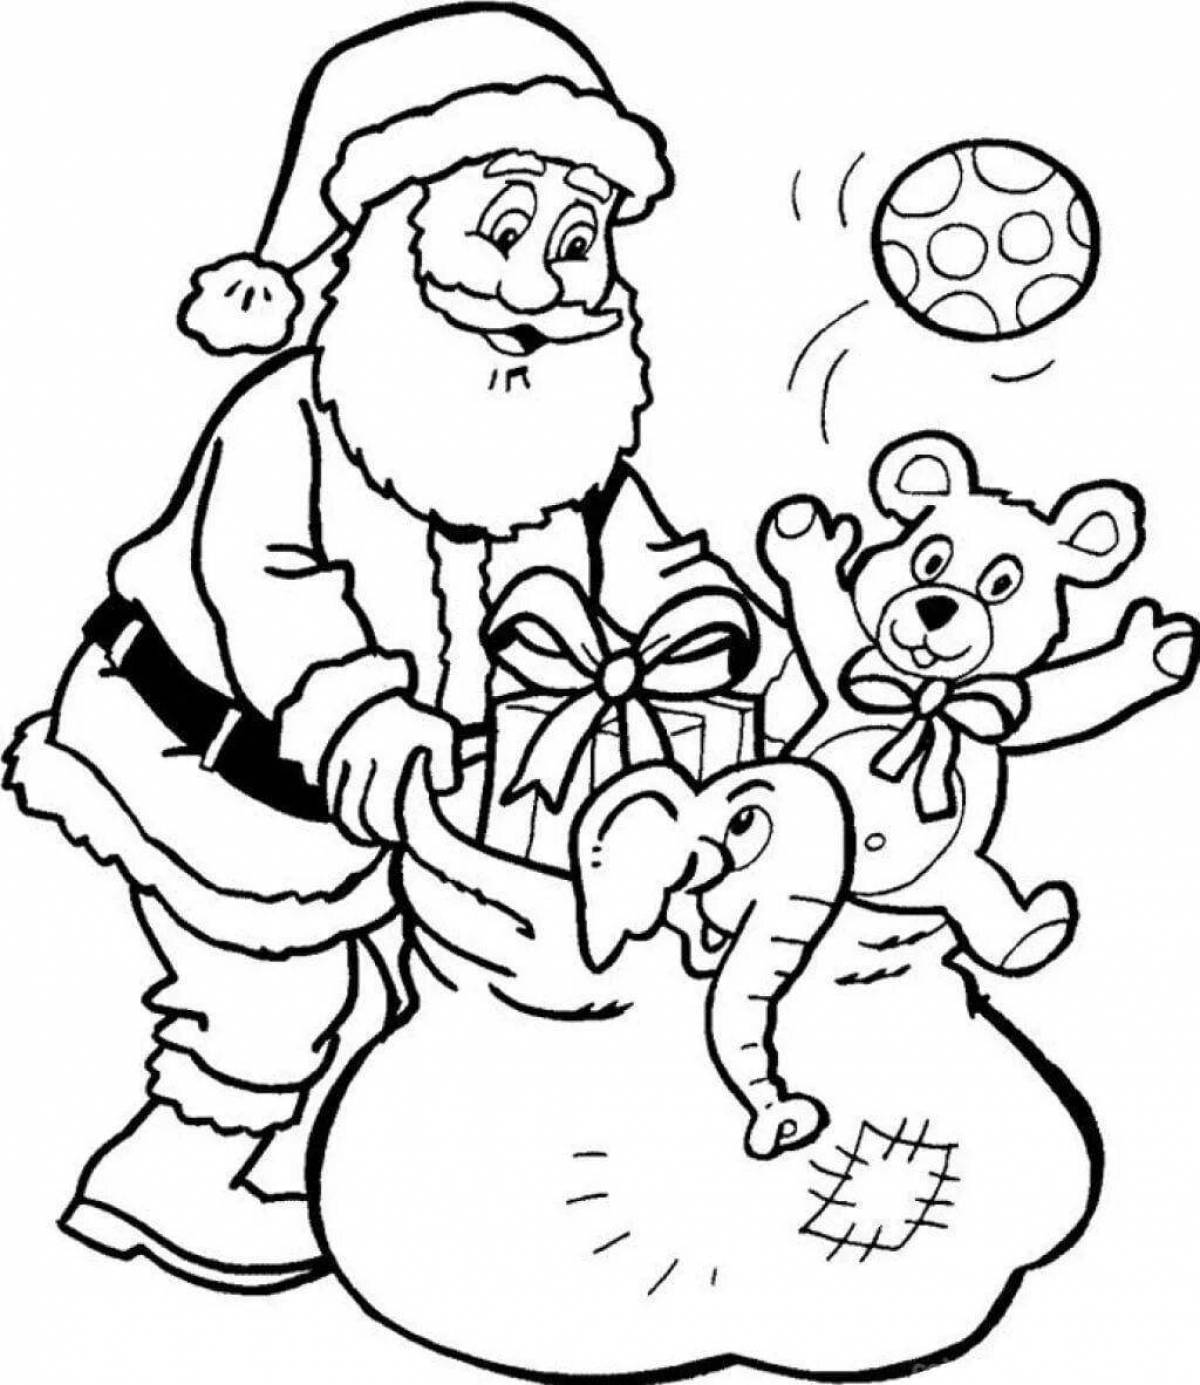 Creative santa claus coloring book for kids 2-3 years old